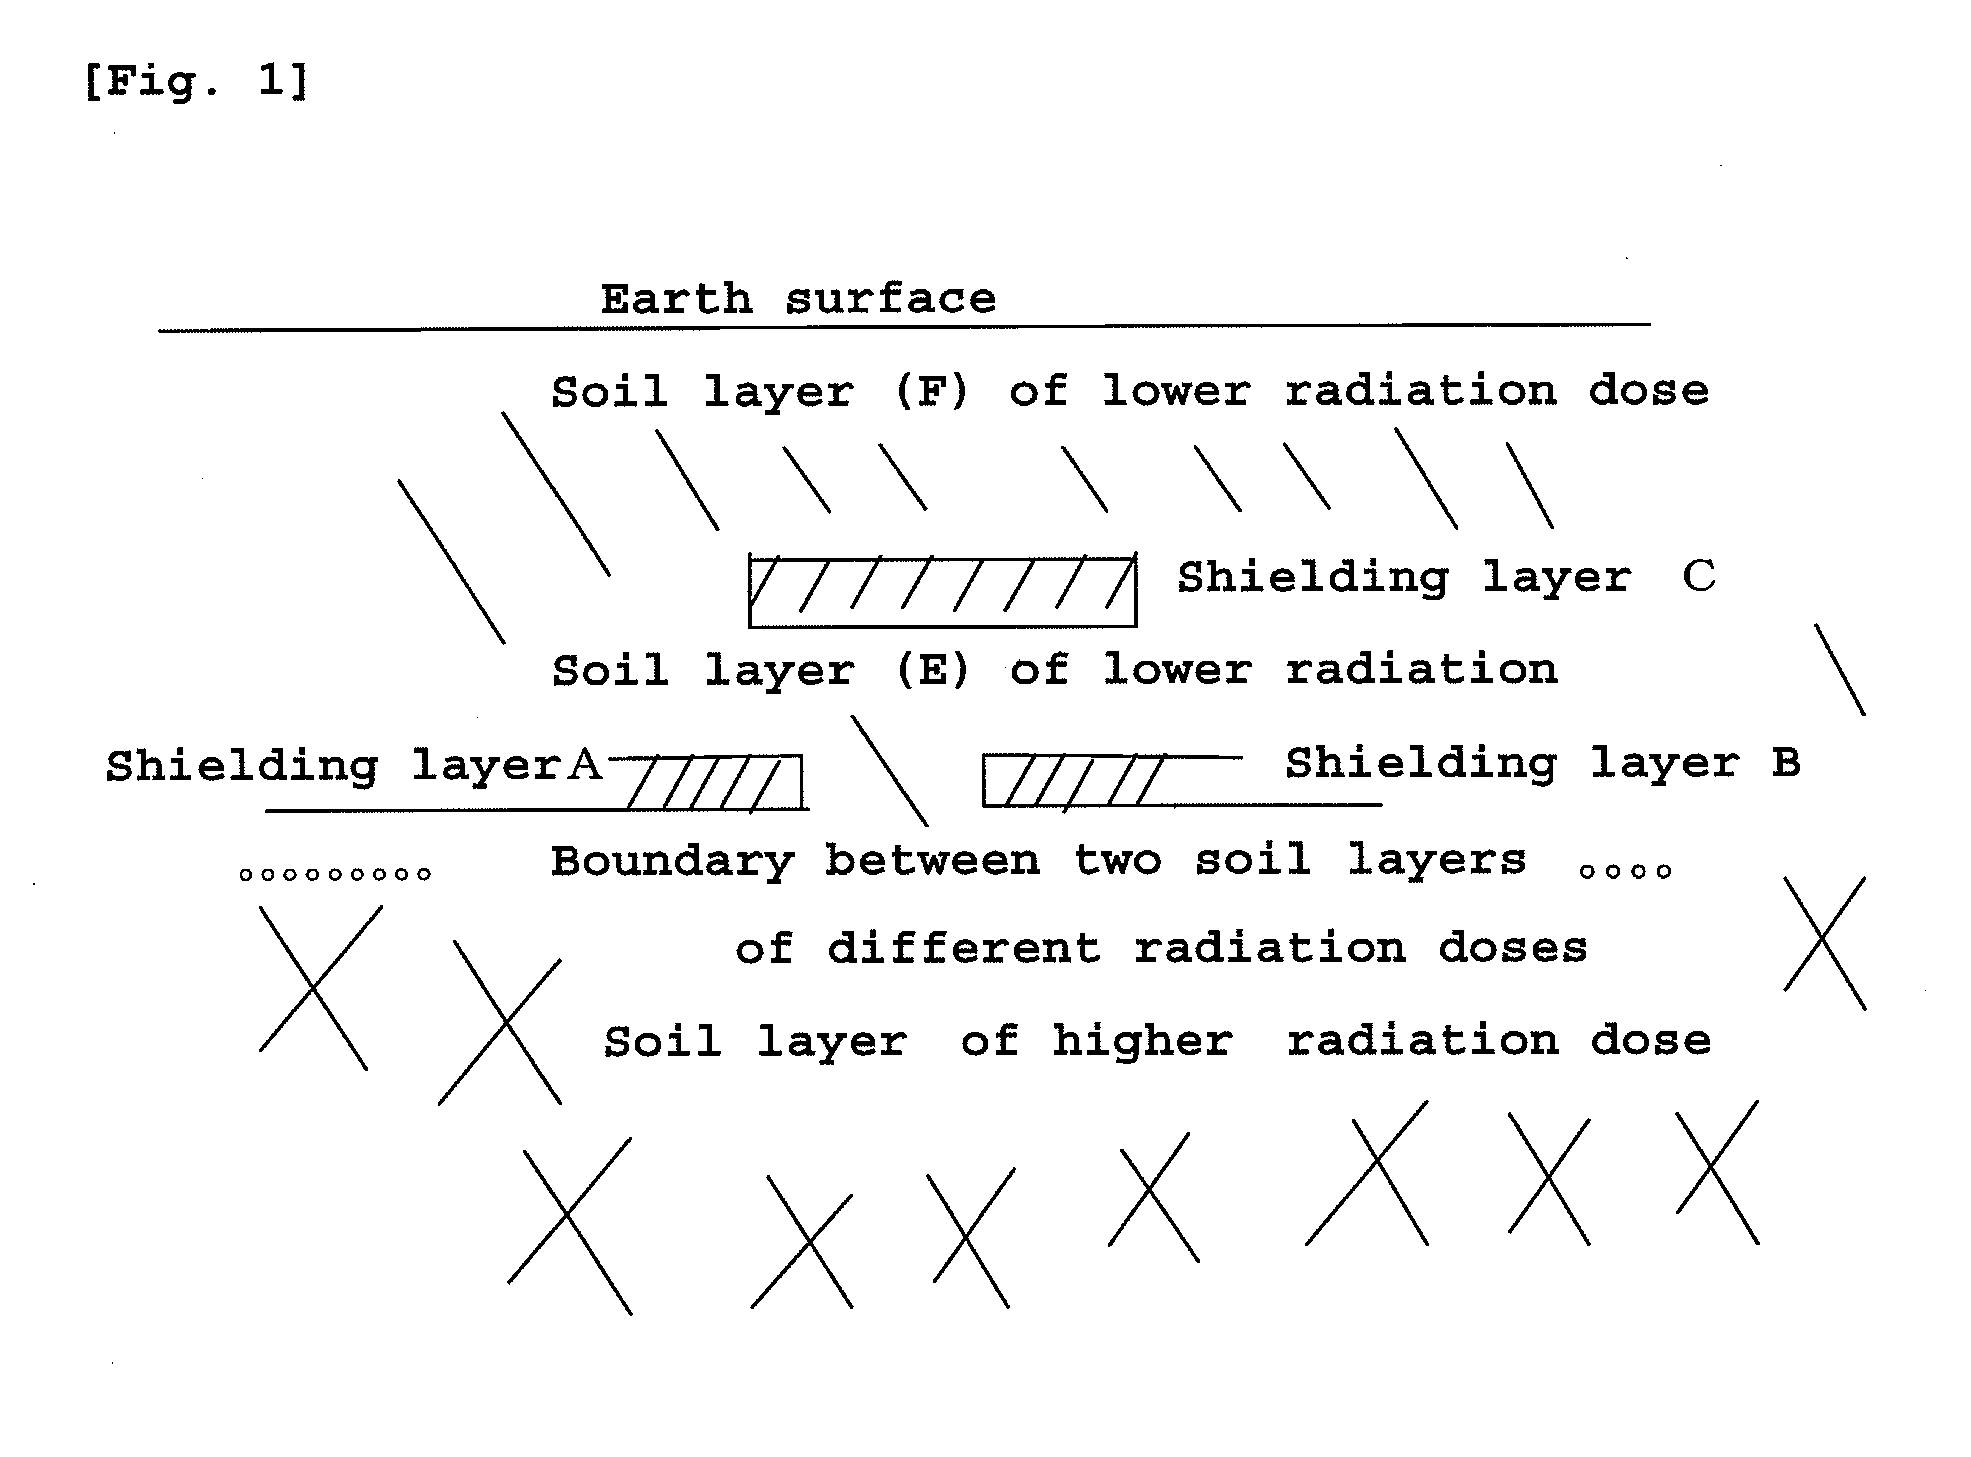 Shielding material used for shielding of radiation and method for shielding a radiation emitted from earth surface using the shielding material